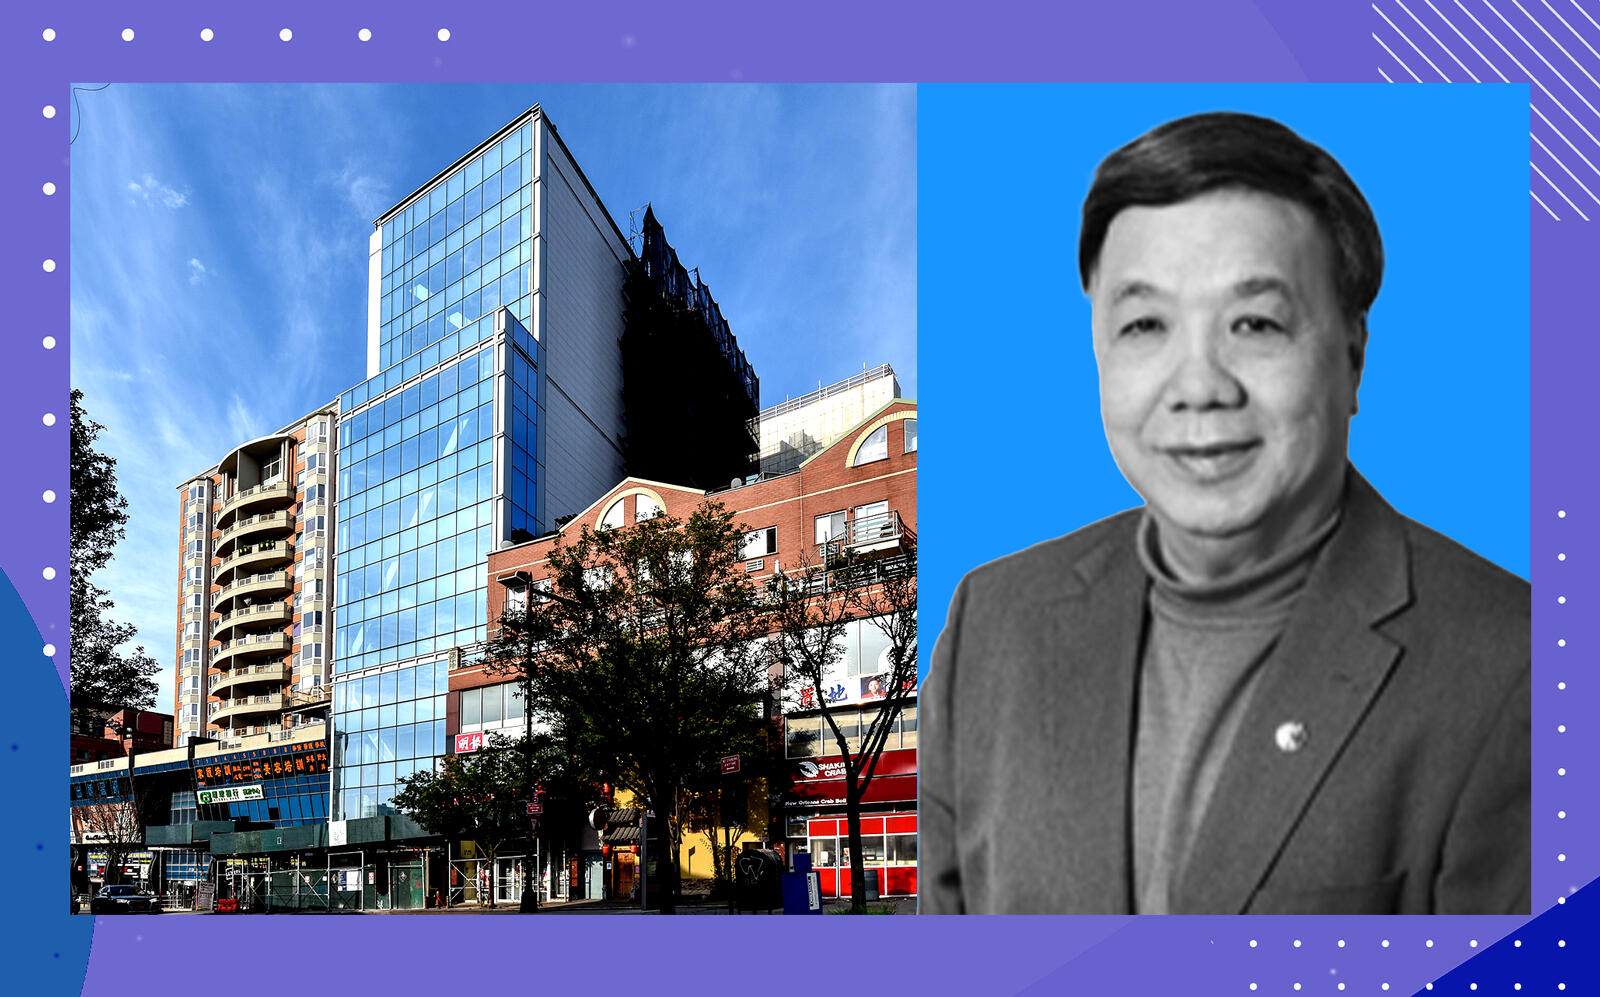 37-12 Prince Street and F&T Group CEO Michael Lee (Margulies Hoelzli Architecture, F&T)